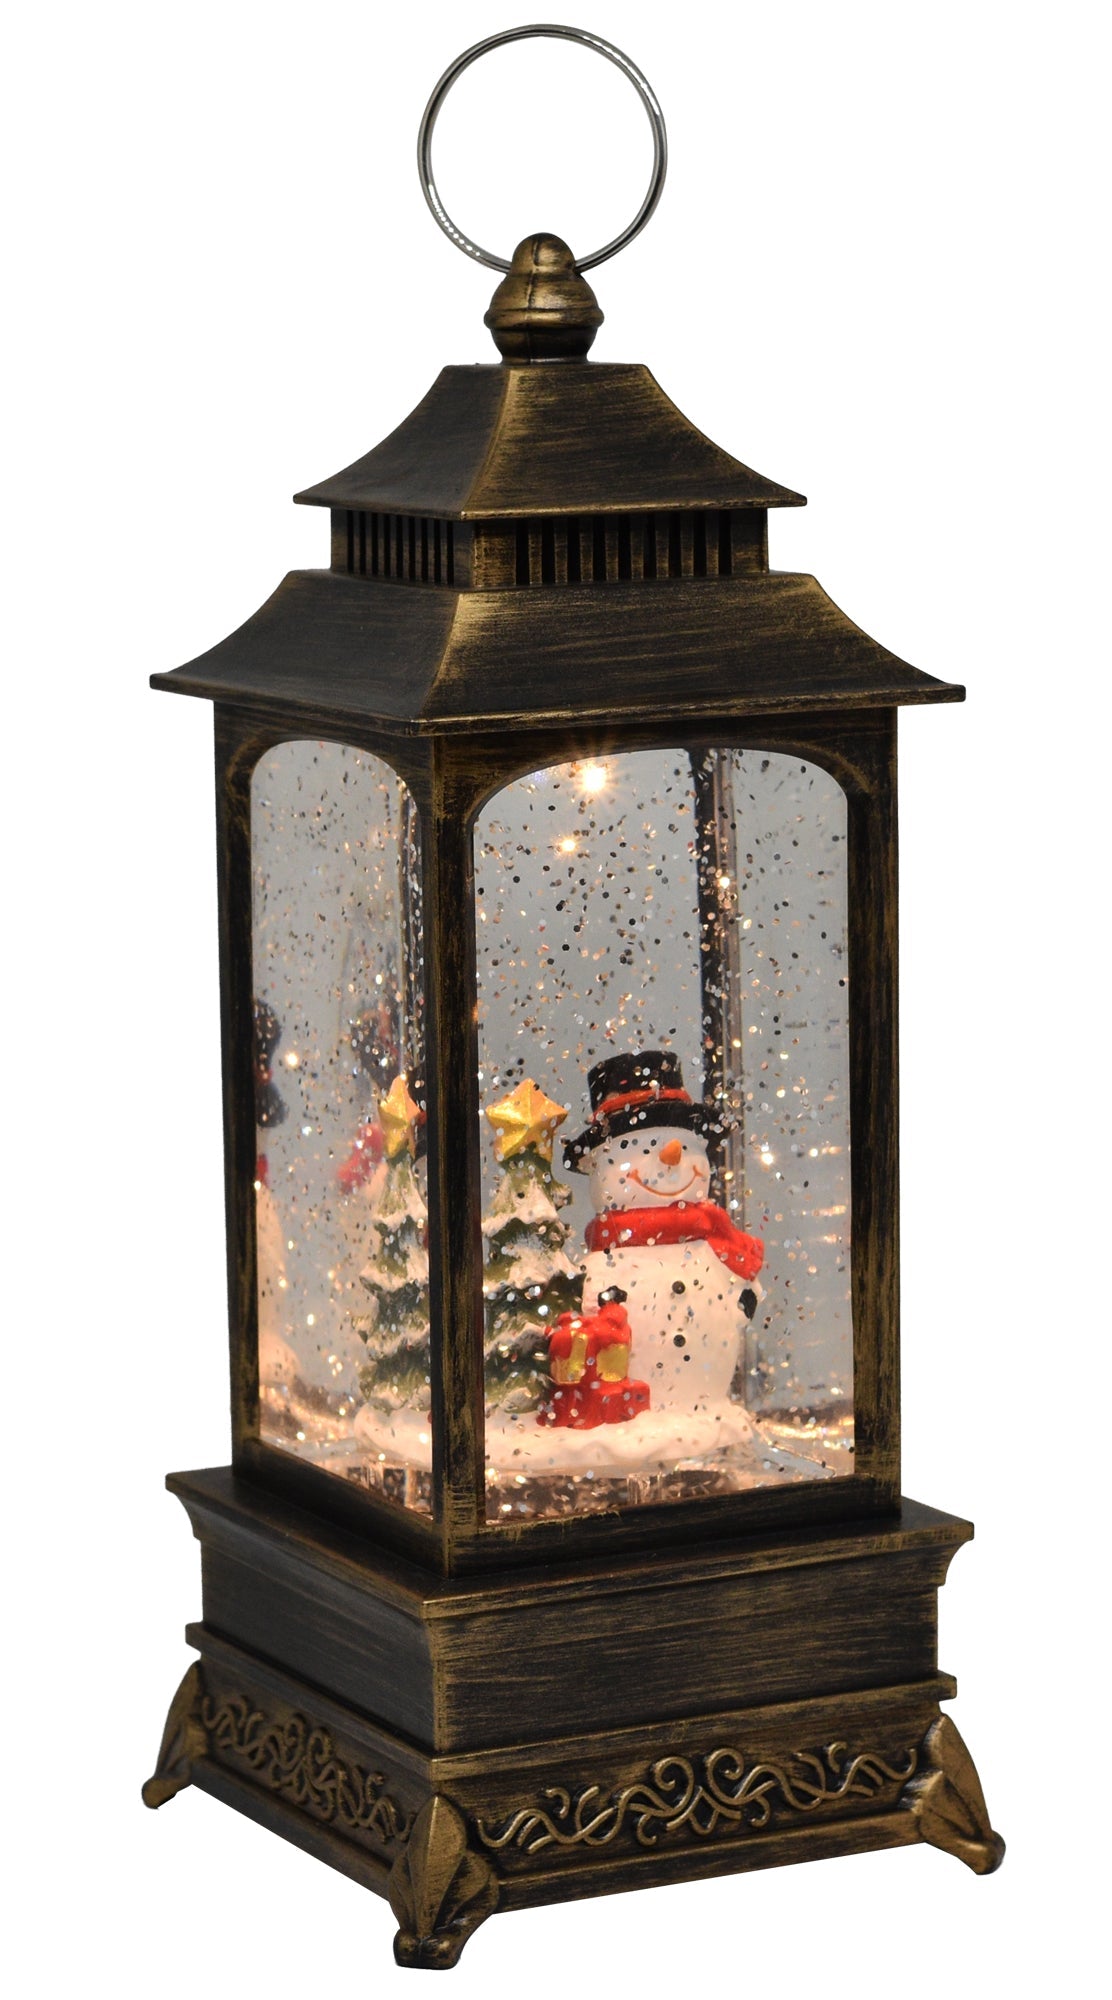 Christmas Snow Globe Lantern with Music, Battery Operated Lighted Swirling Glitter Water Lantern for Christmas Home Decoration, Snowman